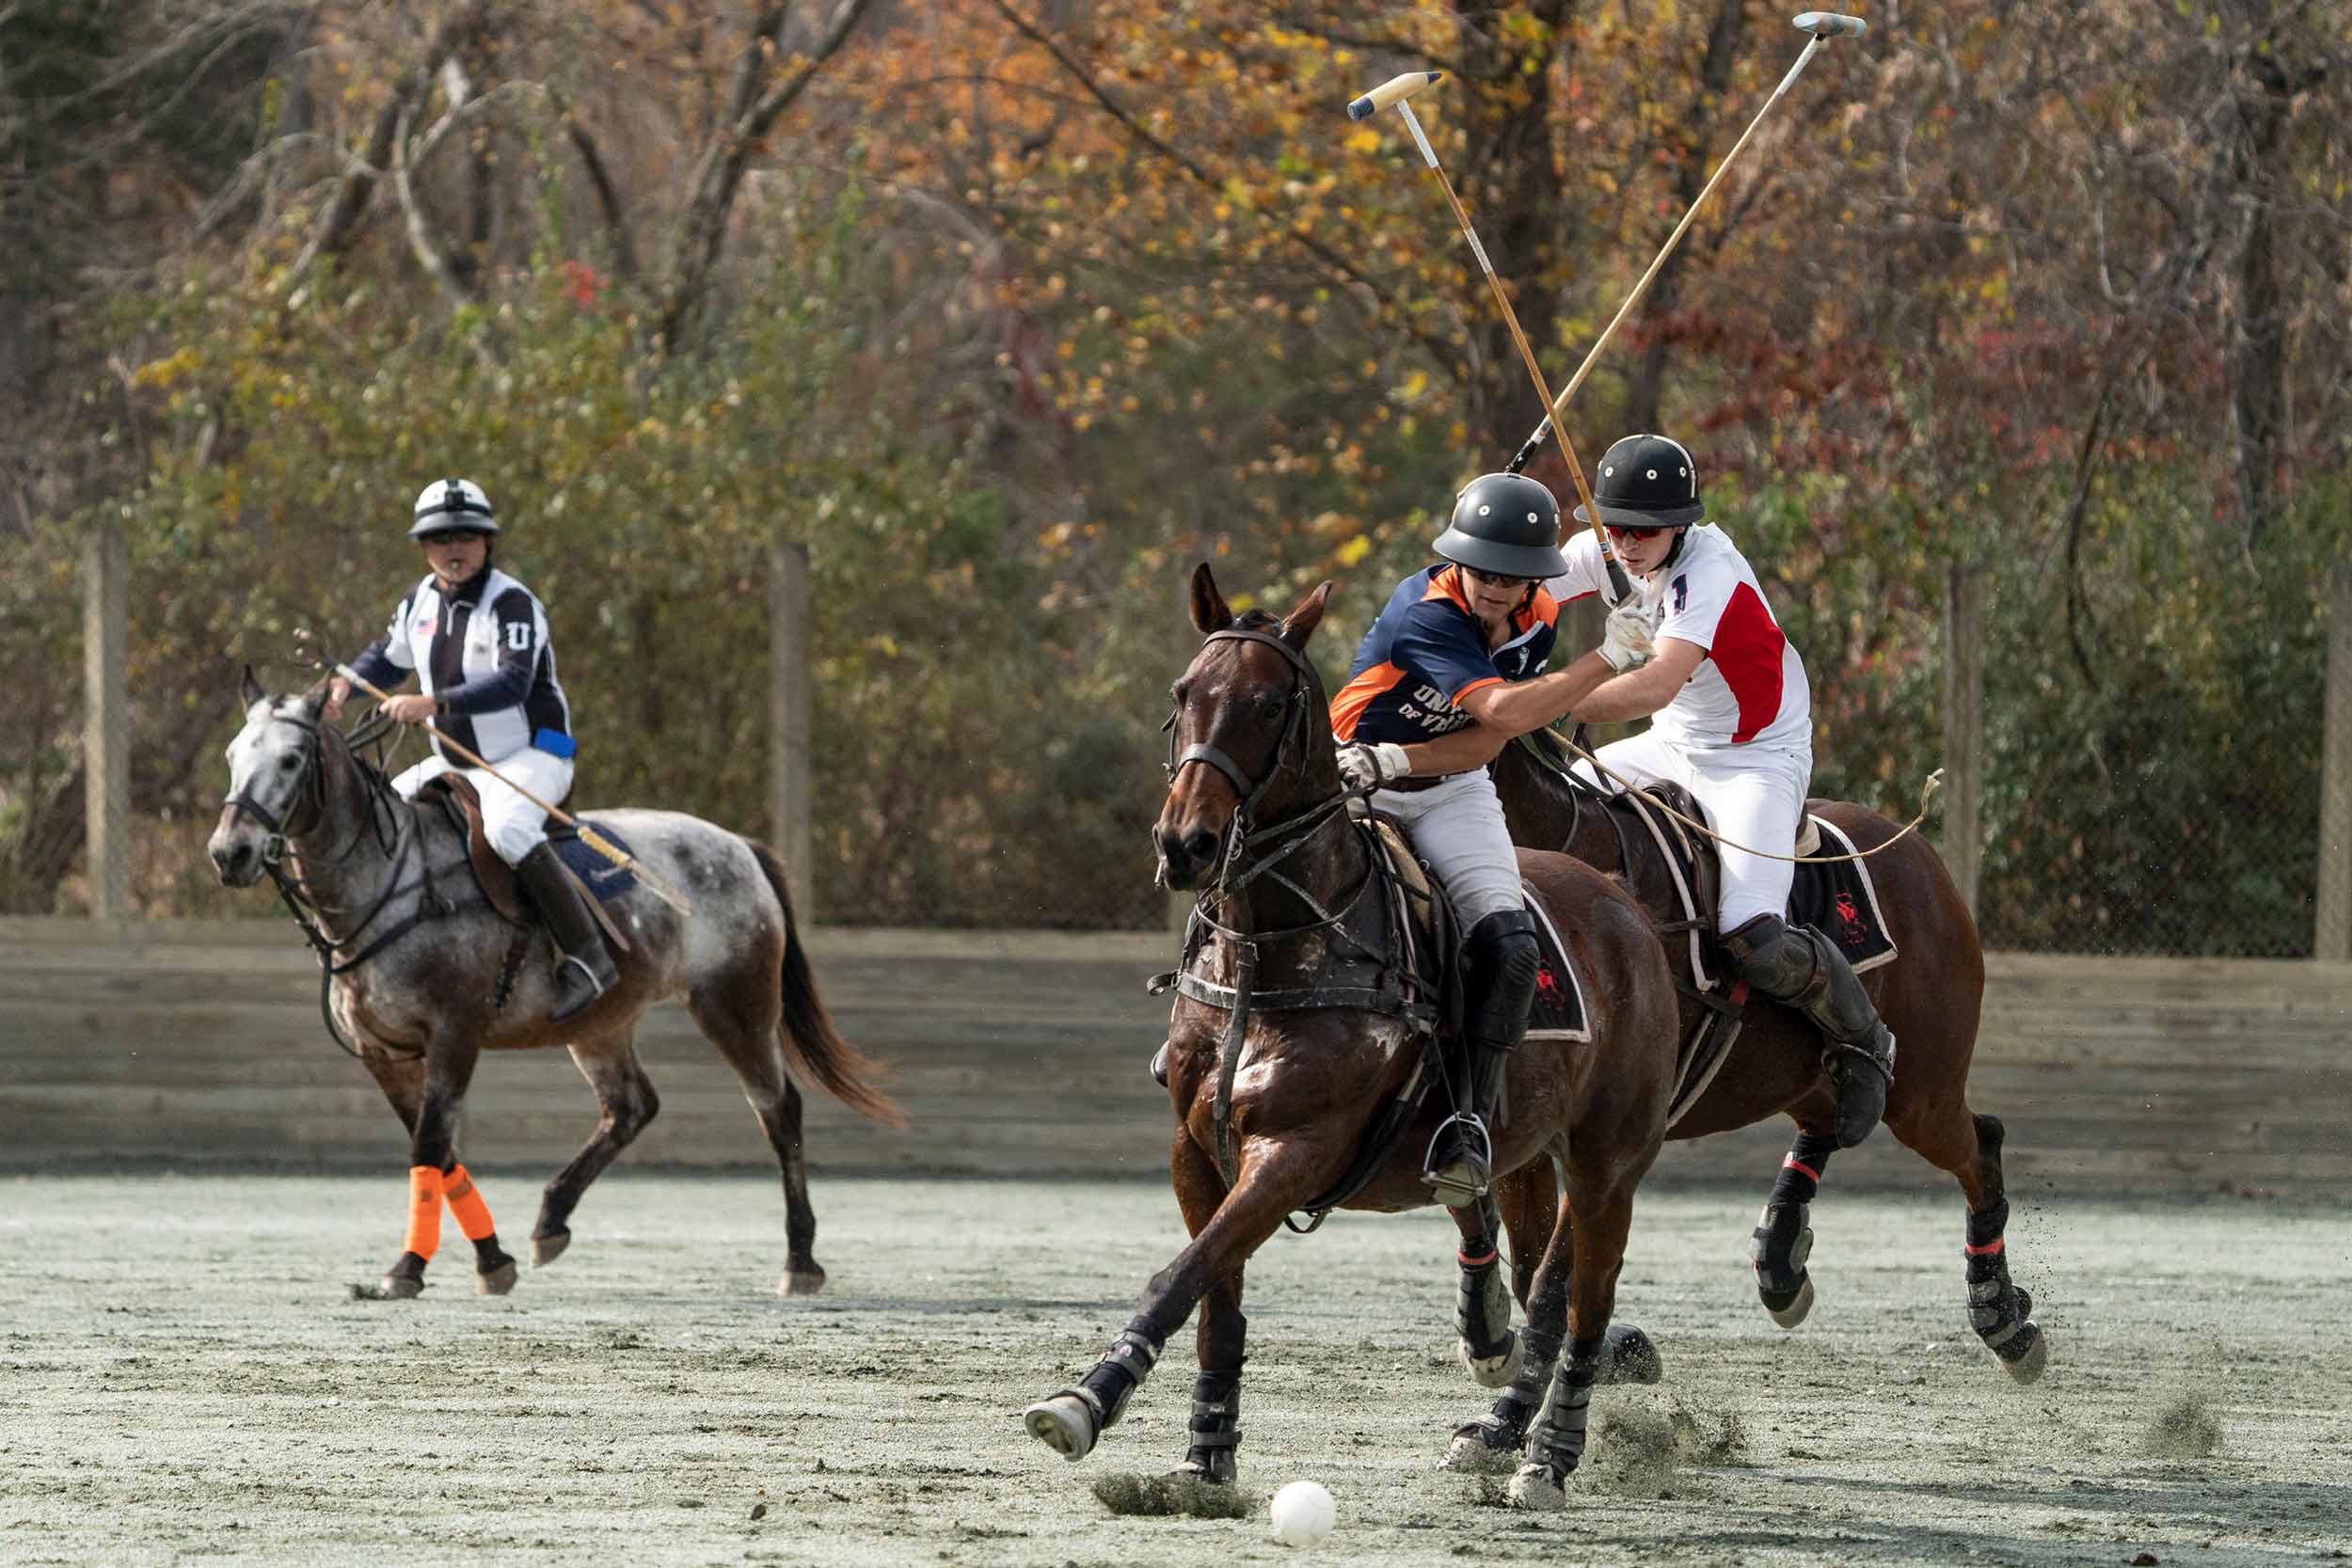 UVA polo player defends ball during a match